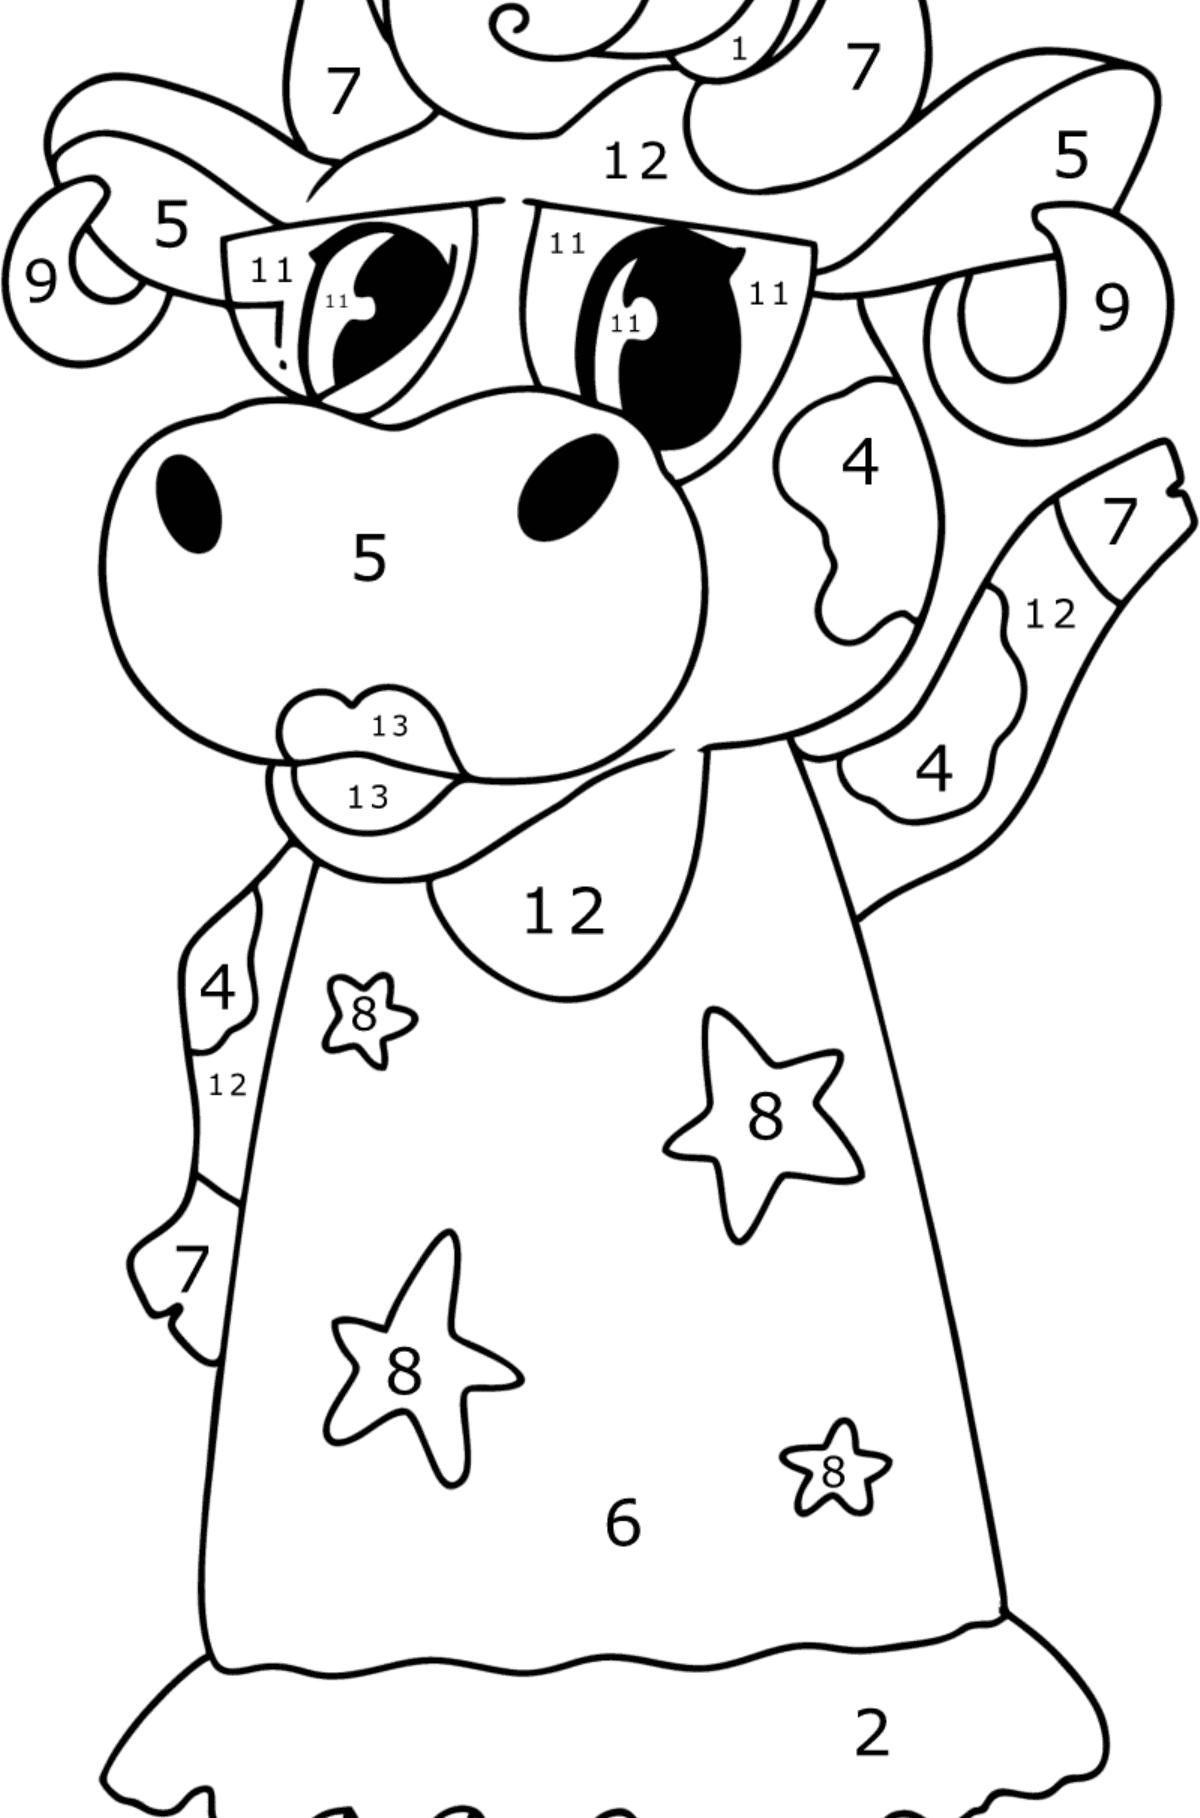 Cartoon cow standing up coloring page - Coloring by Numbers for Kids